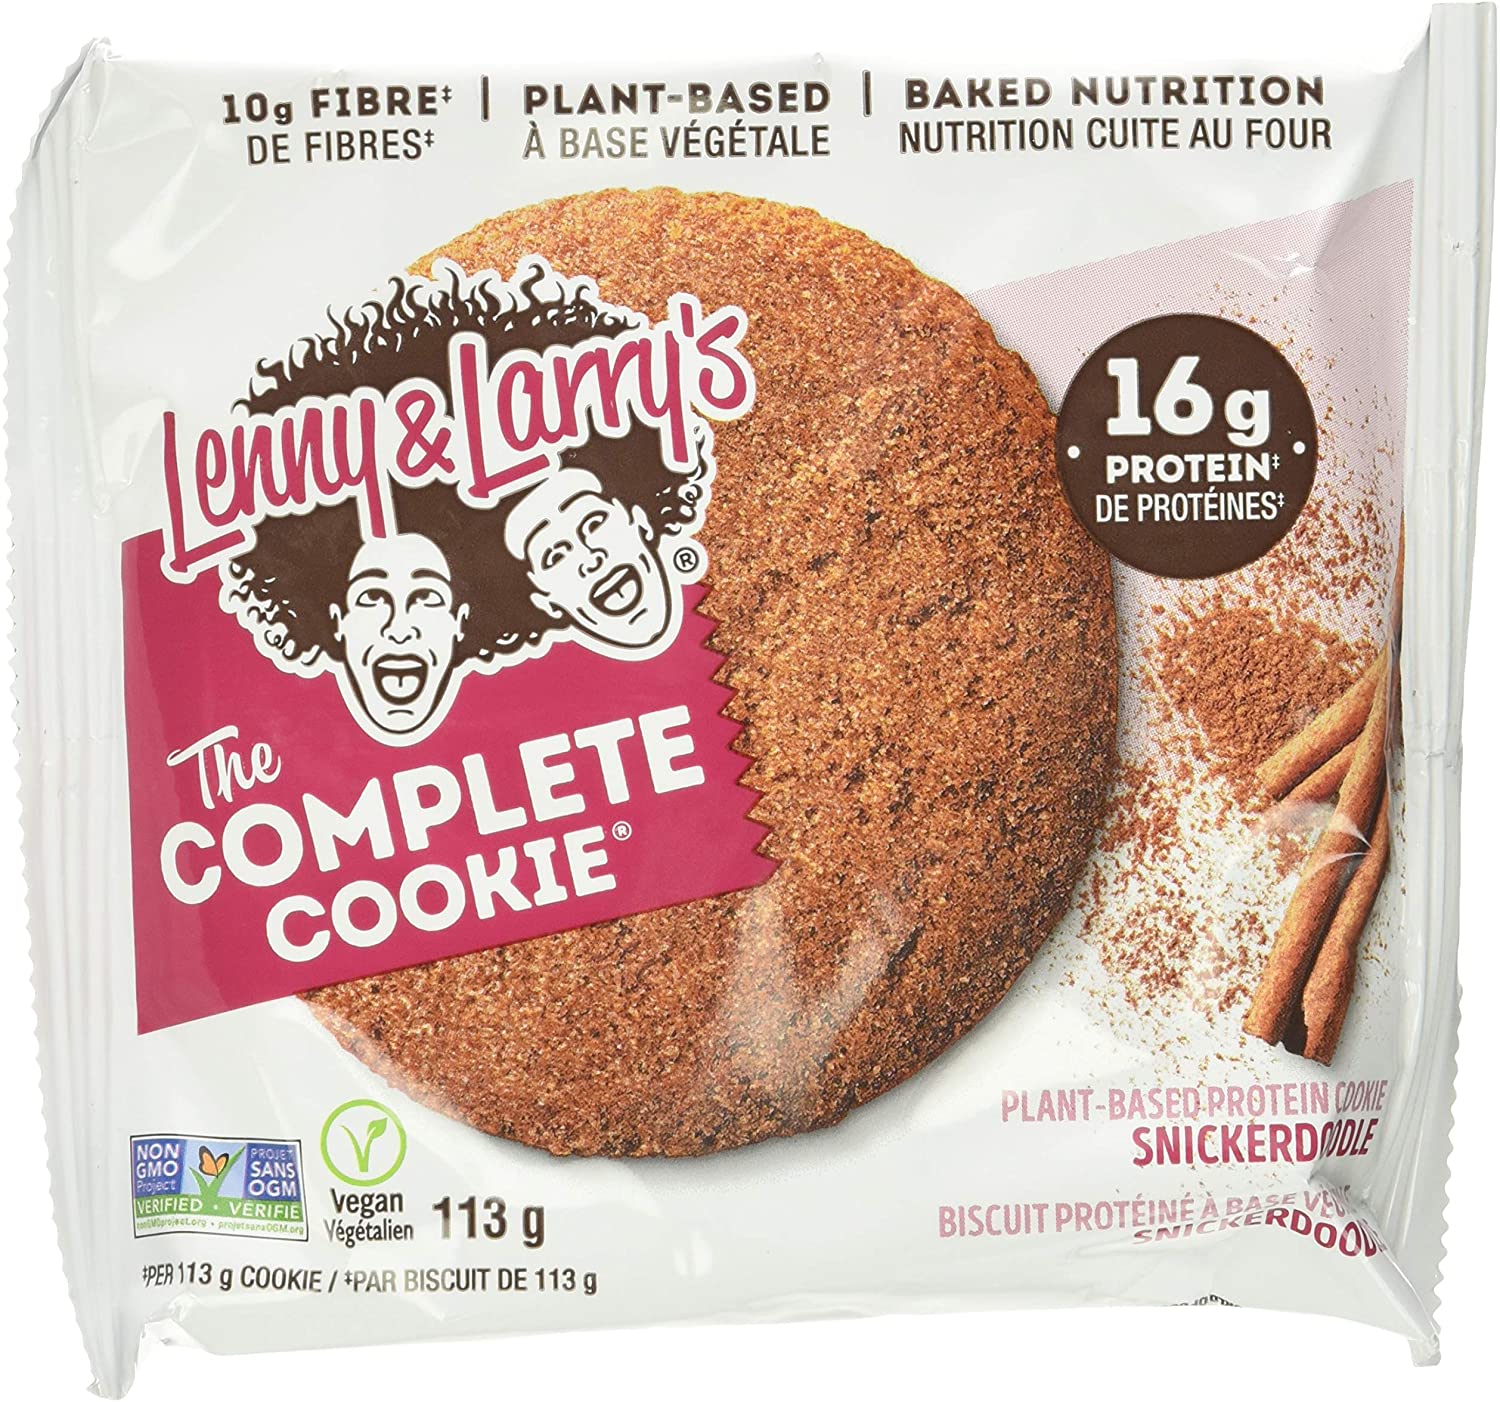 Lenny & Larry's Complete Cookie Snickerdoodle / 131g